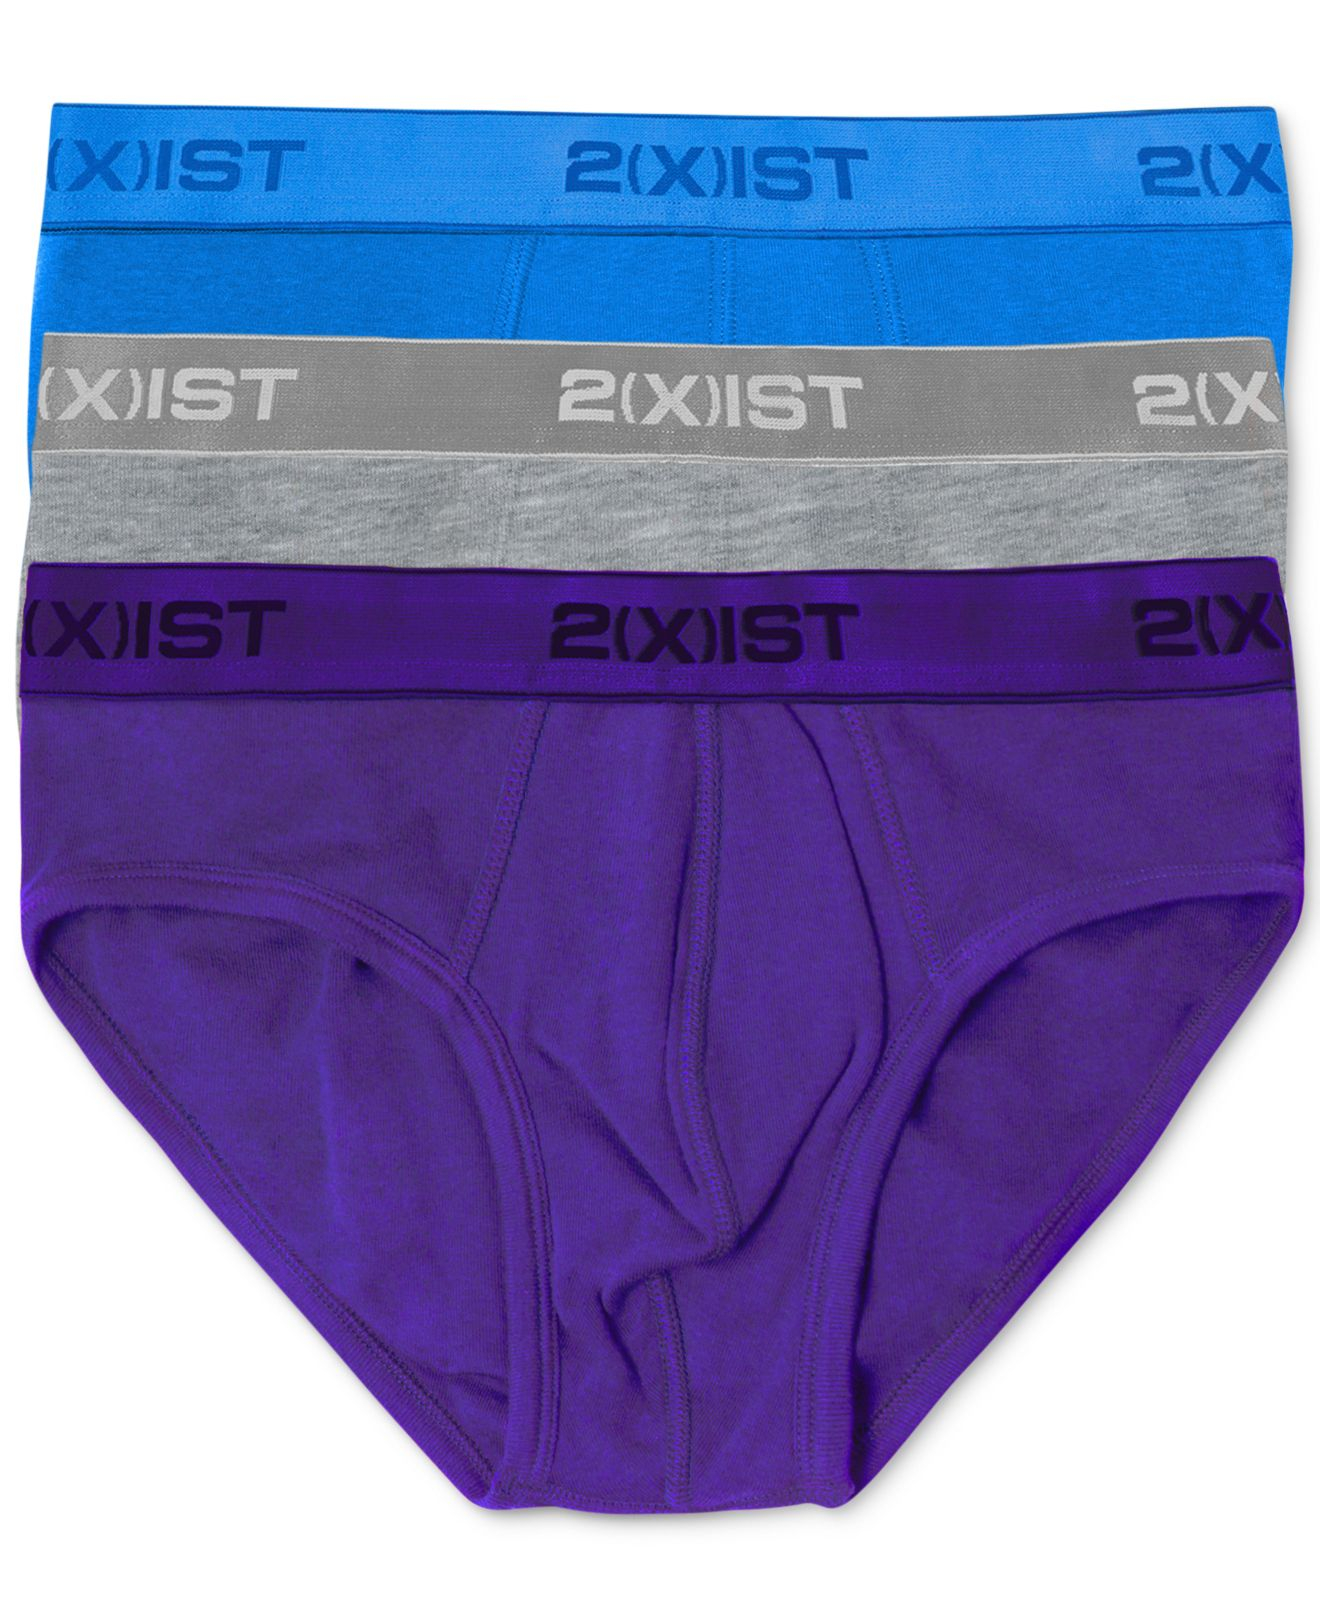 Lyst - 2xist Essential Range No Show Brief 3 Pack in Blue for Men